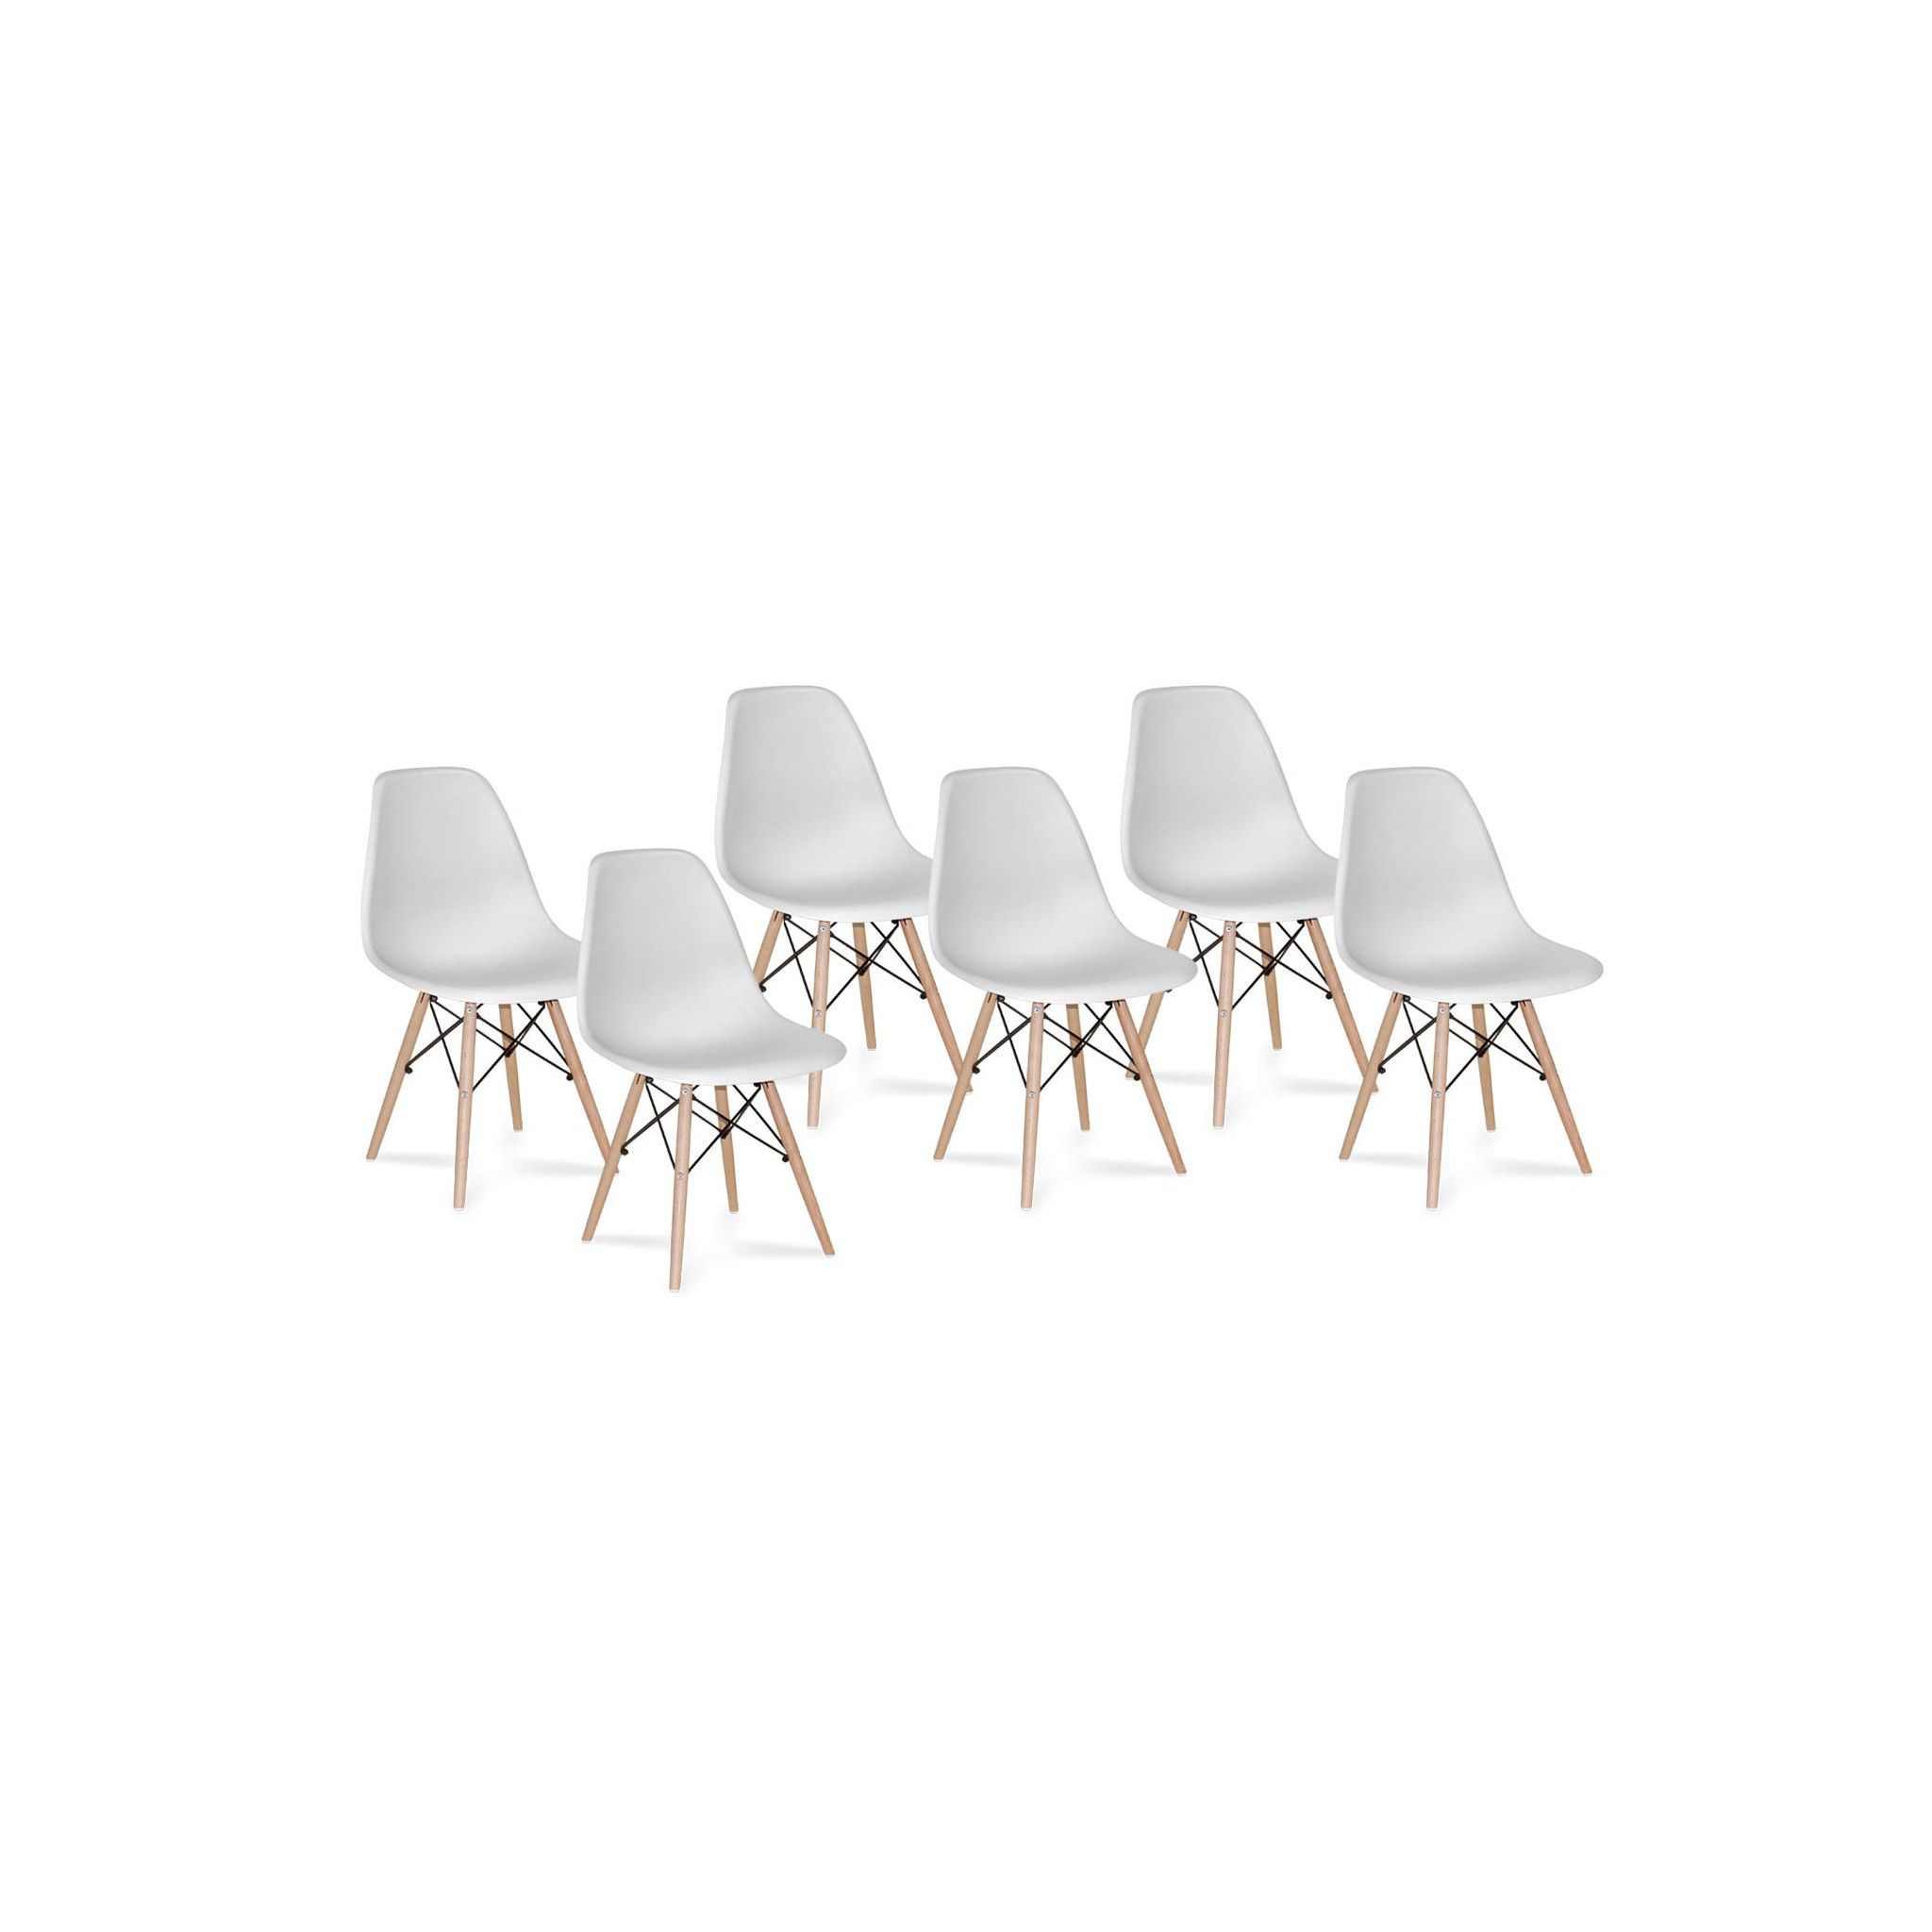 PACK 6 CHAISES TOWER WOOD BLANCHES EXTRA QUALITY